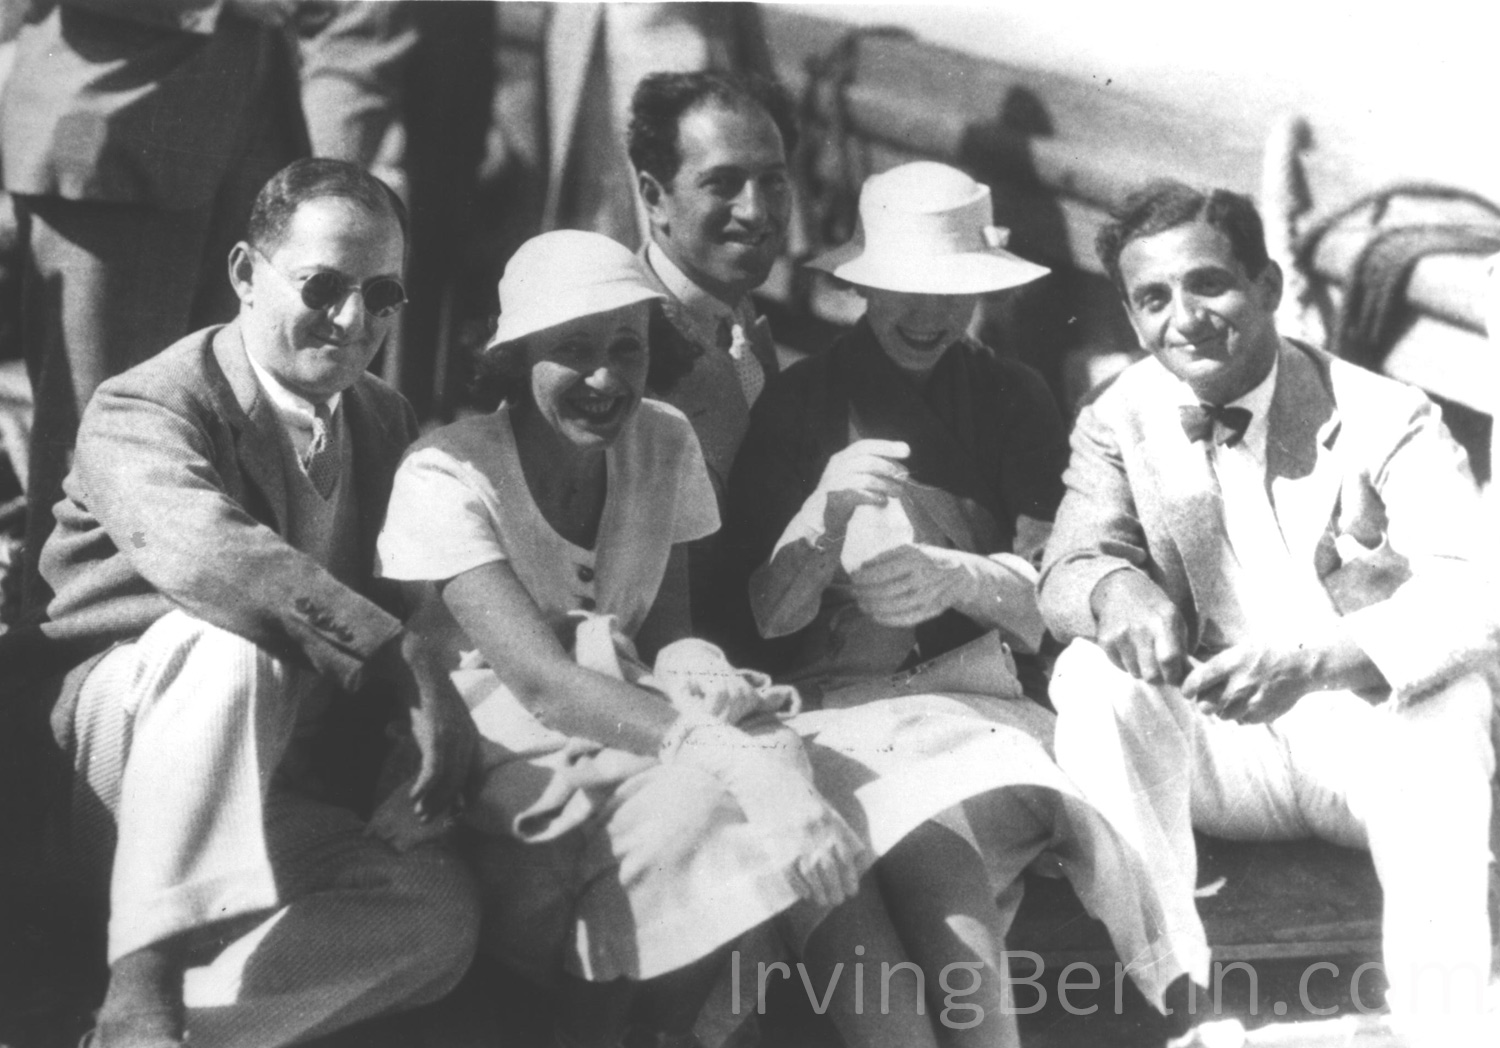  Ira, Leonore and George Gershwin with Ellin and Irving Berlin 